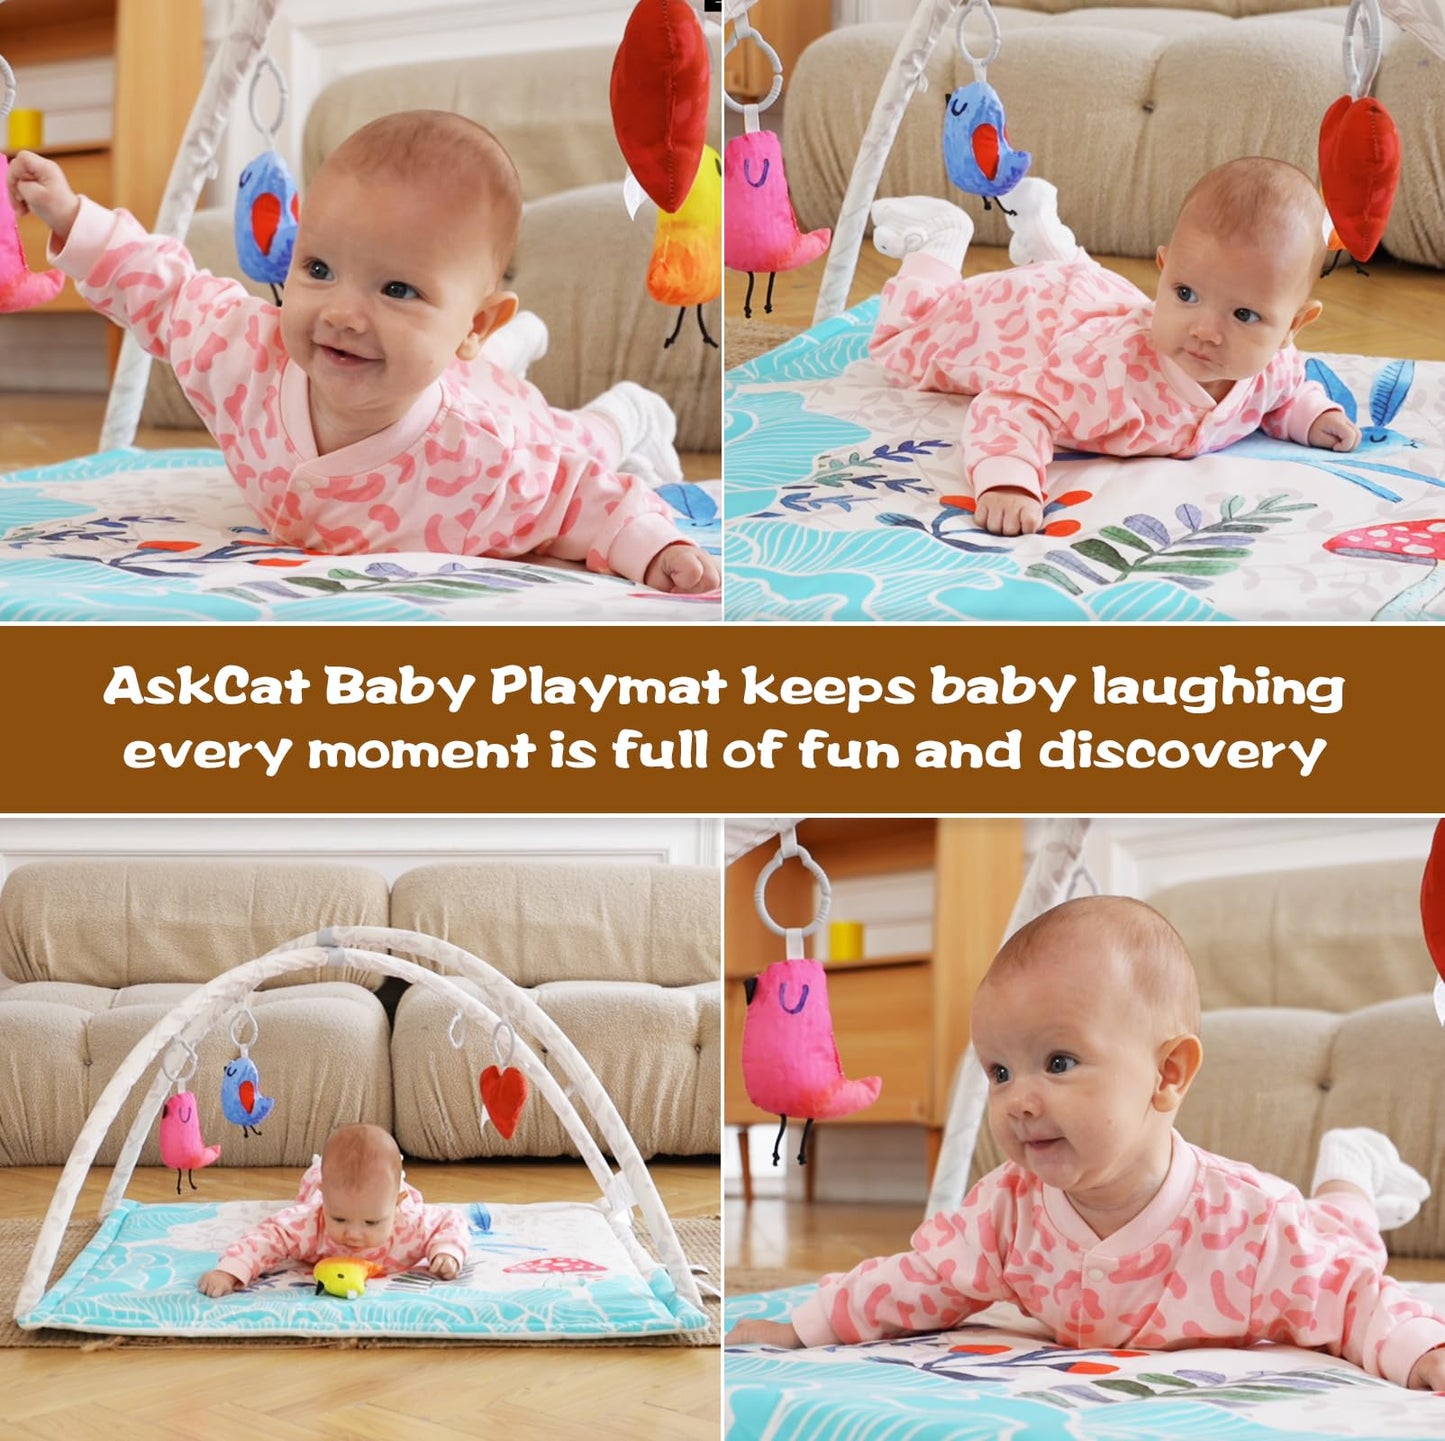 Baby Play Gym Mat,4 in 1 Baby Play Mat Activity Gym, Baby Play Mats for Babies, Portable Baby Play Gym Infant Activity Center for Newborn to Develop Motor Cognition Suitable for Newborns to Toddlers